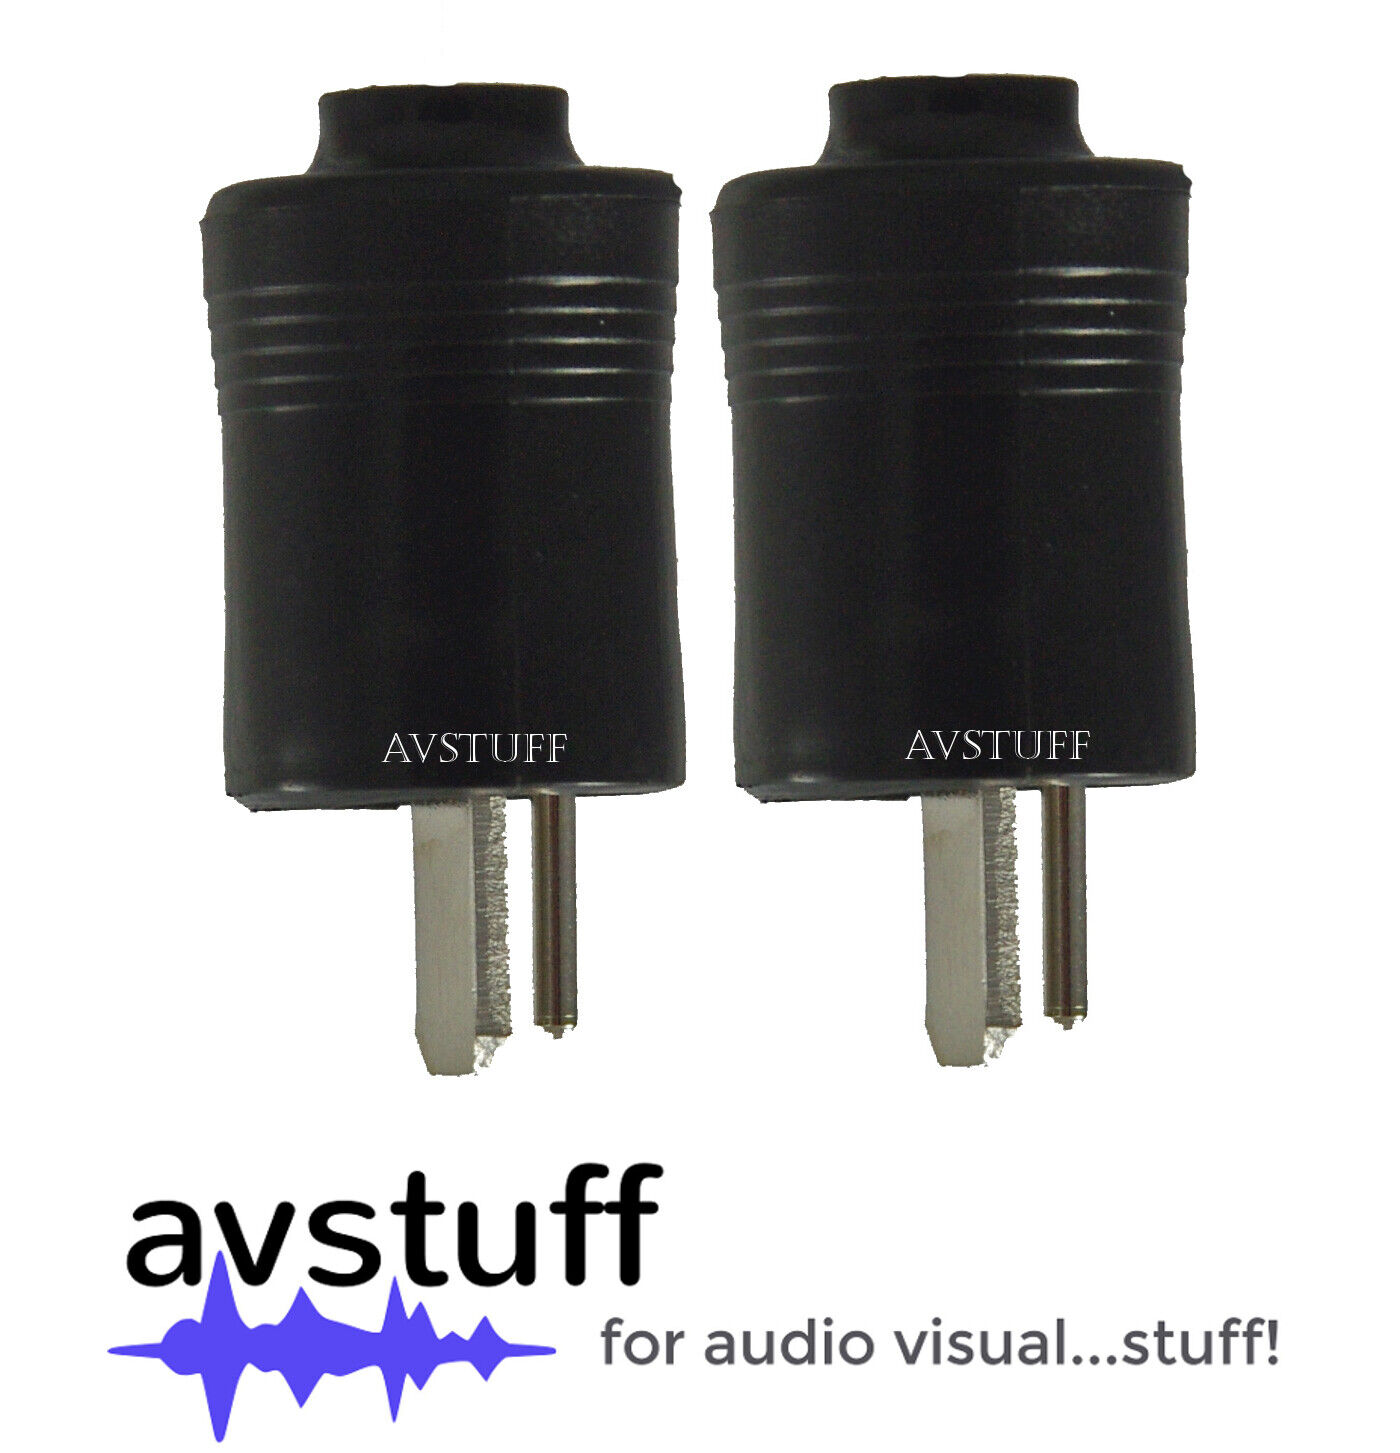 2 x 2 PIN DIN CONNECTOR PLUG suits BANG & OLUFSEN B&O SPEAKERS